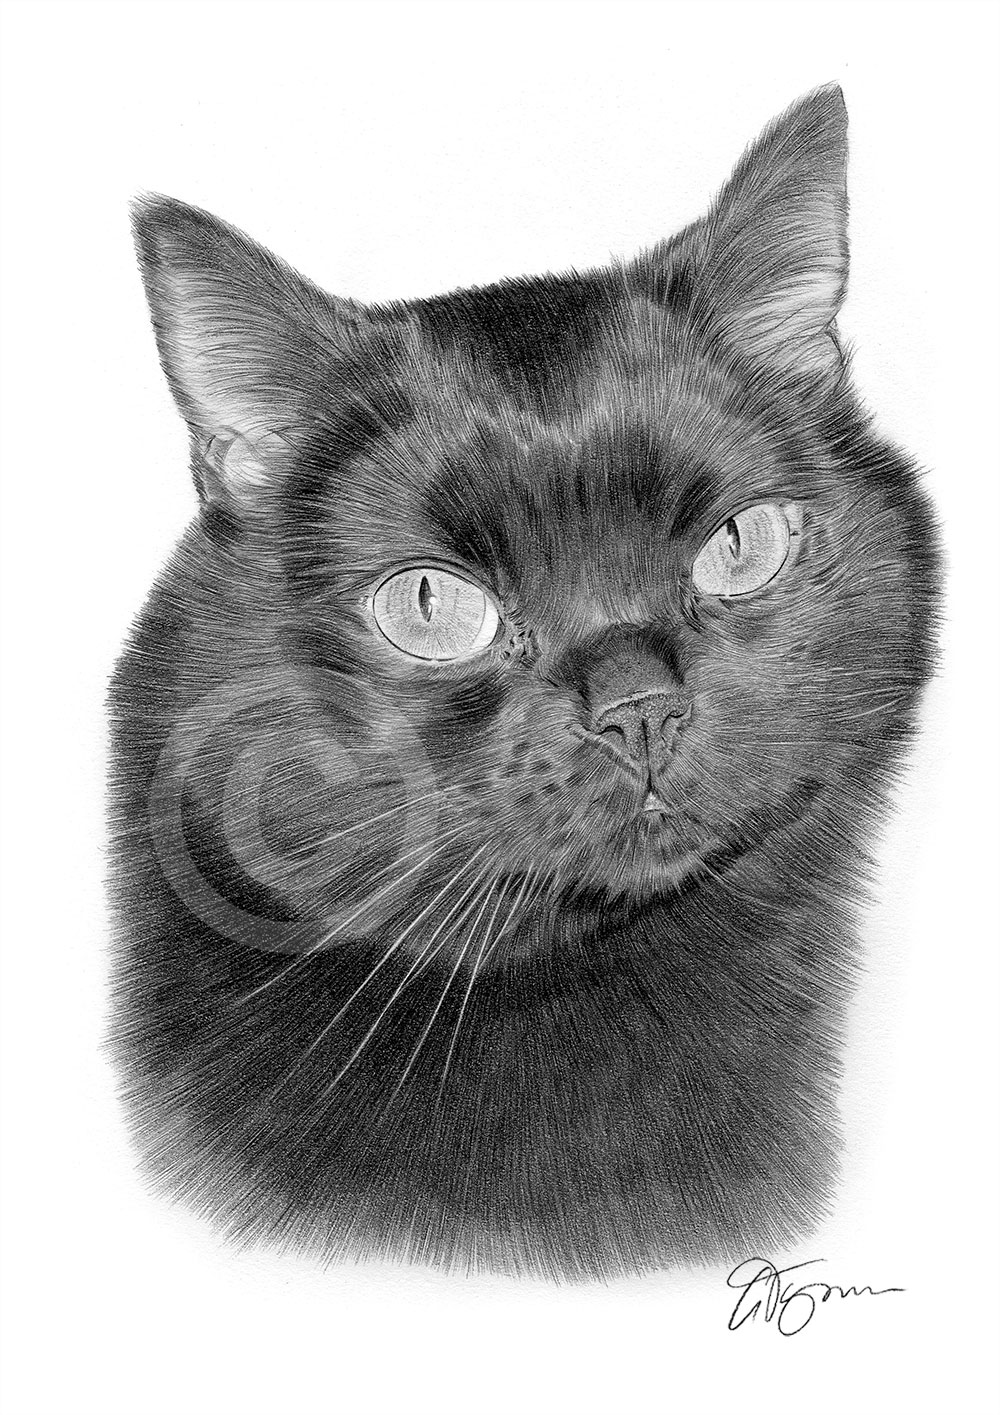 Pencil drawing of a black cat by artist Gary Tymon